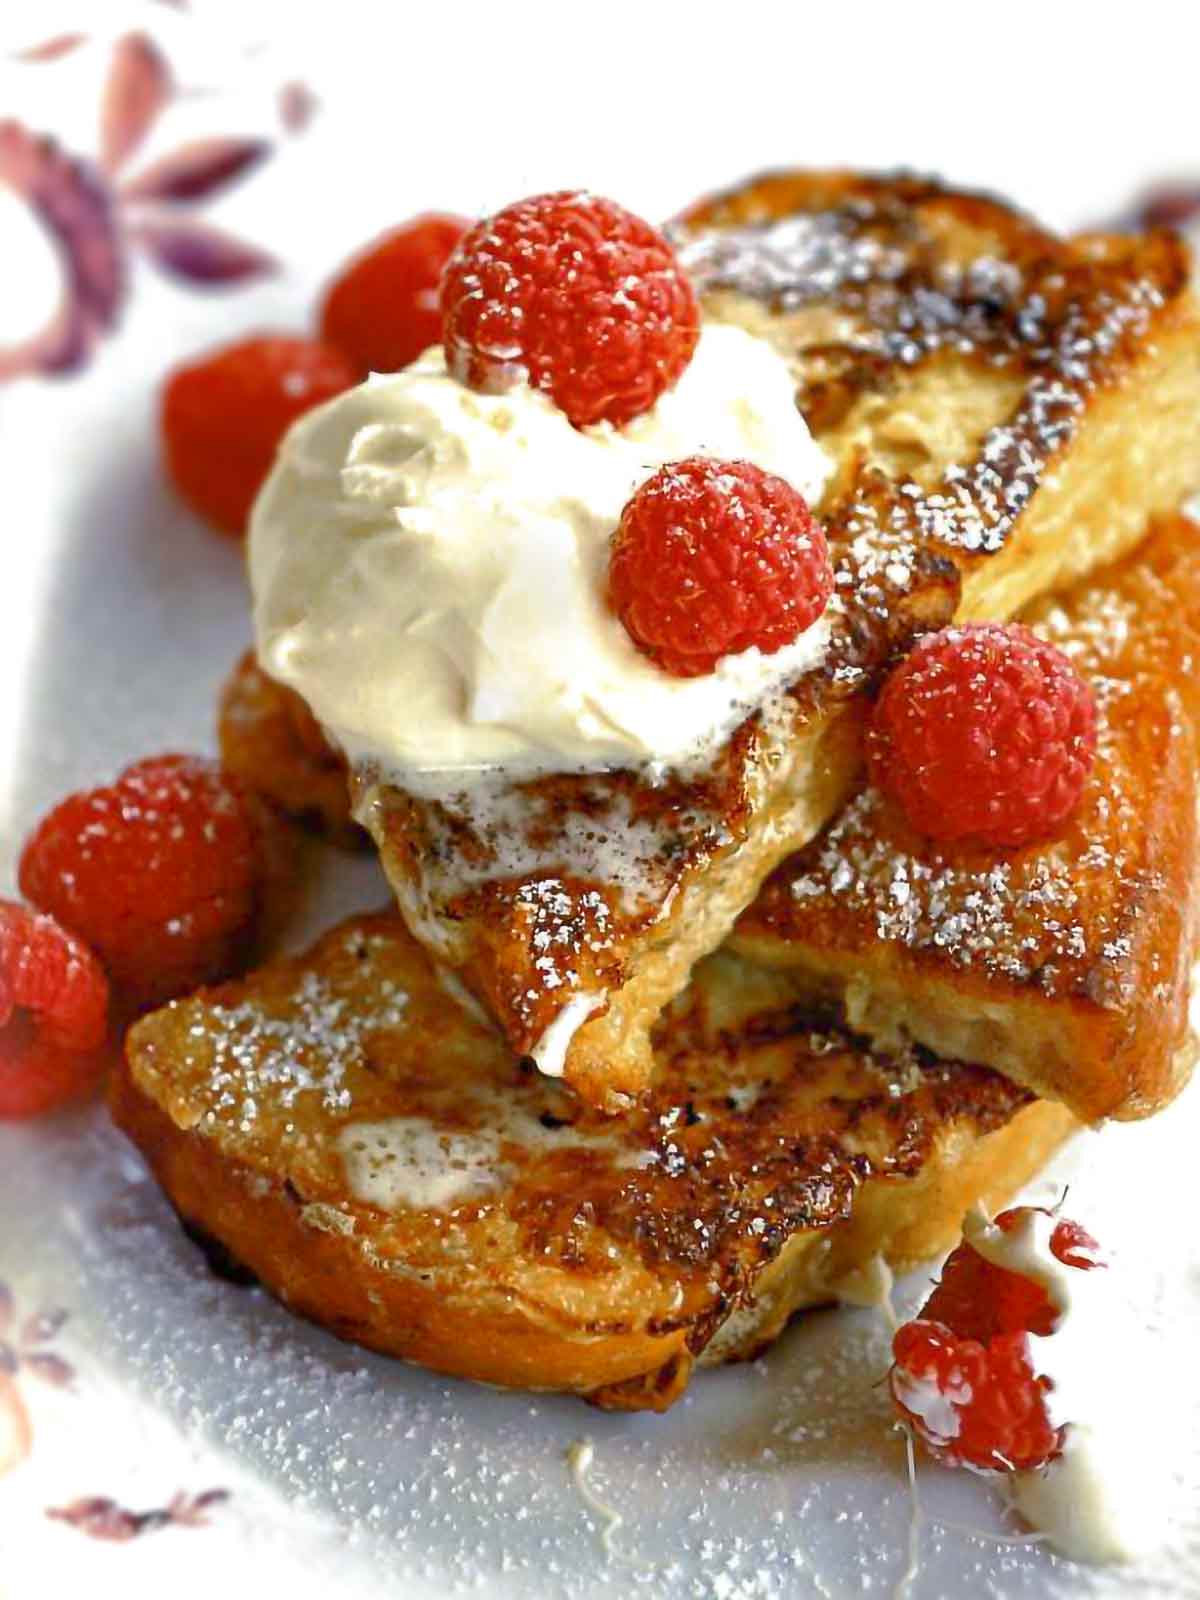 Pain perdu-French toast with raspberries piled on a plate dusted with icing sugar, a dollop of whipping cream, and raspberries.